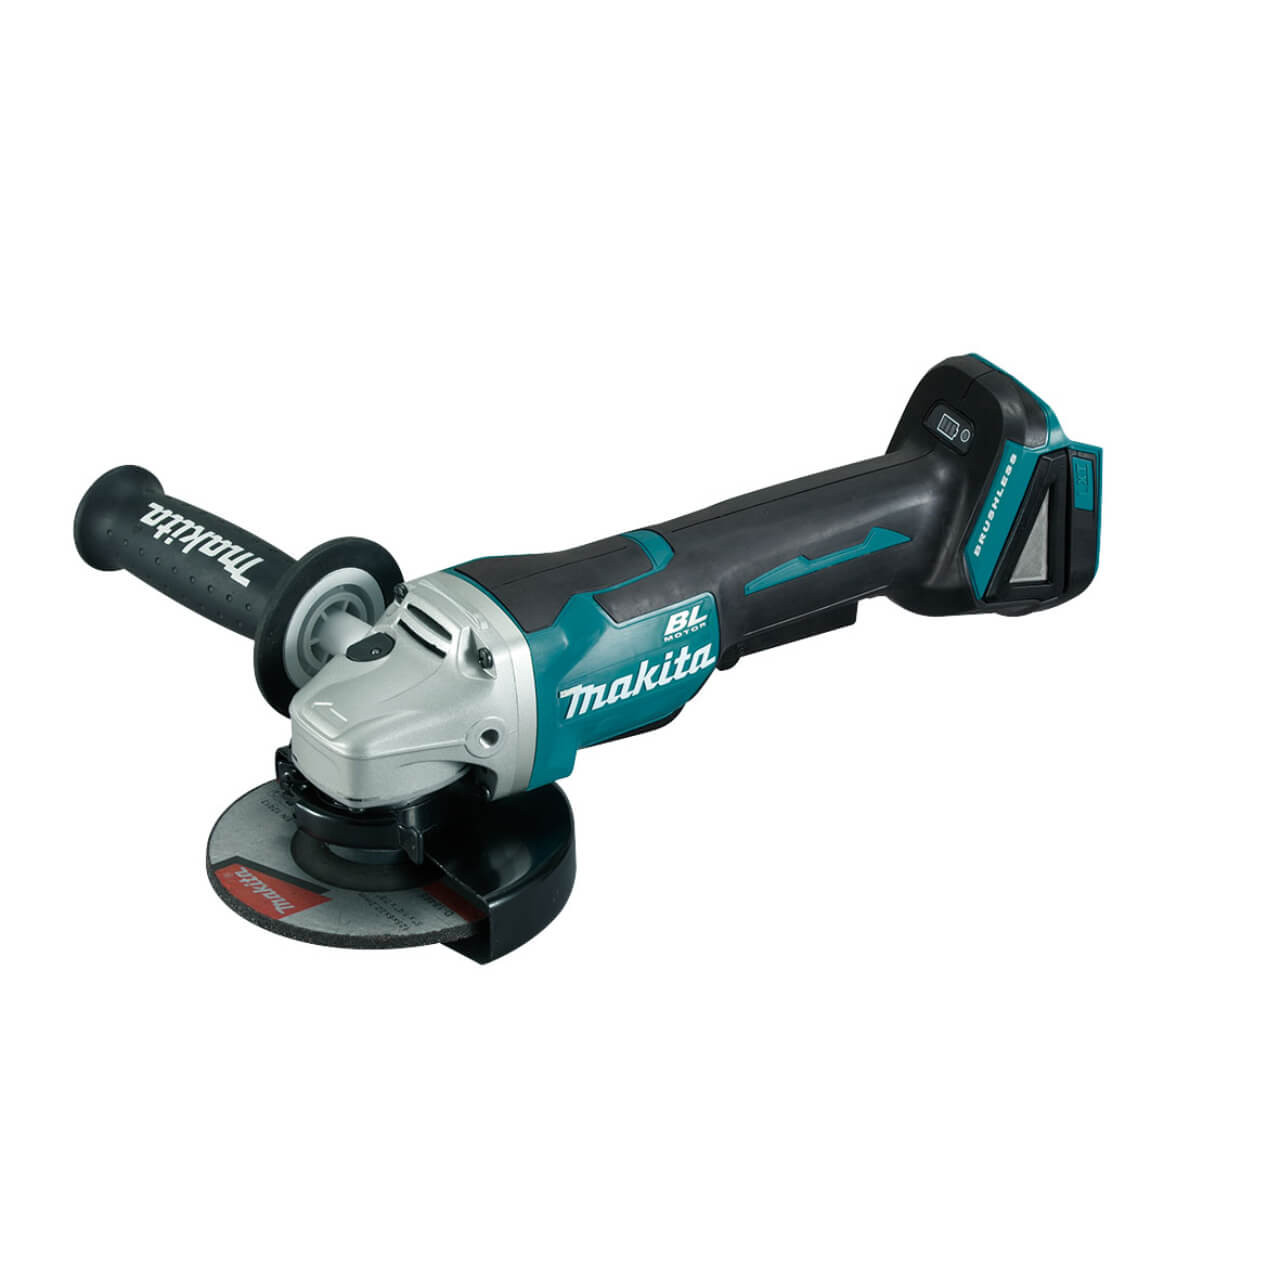 Makita 18V BRUSHLESS 125mm Paddle Switch Brake Angle Grinder Kit - Includes 2 x 5.0Ah Batteries. Rapid Charger & Carry Case